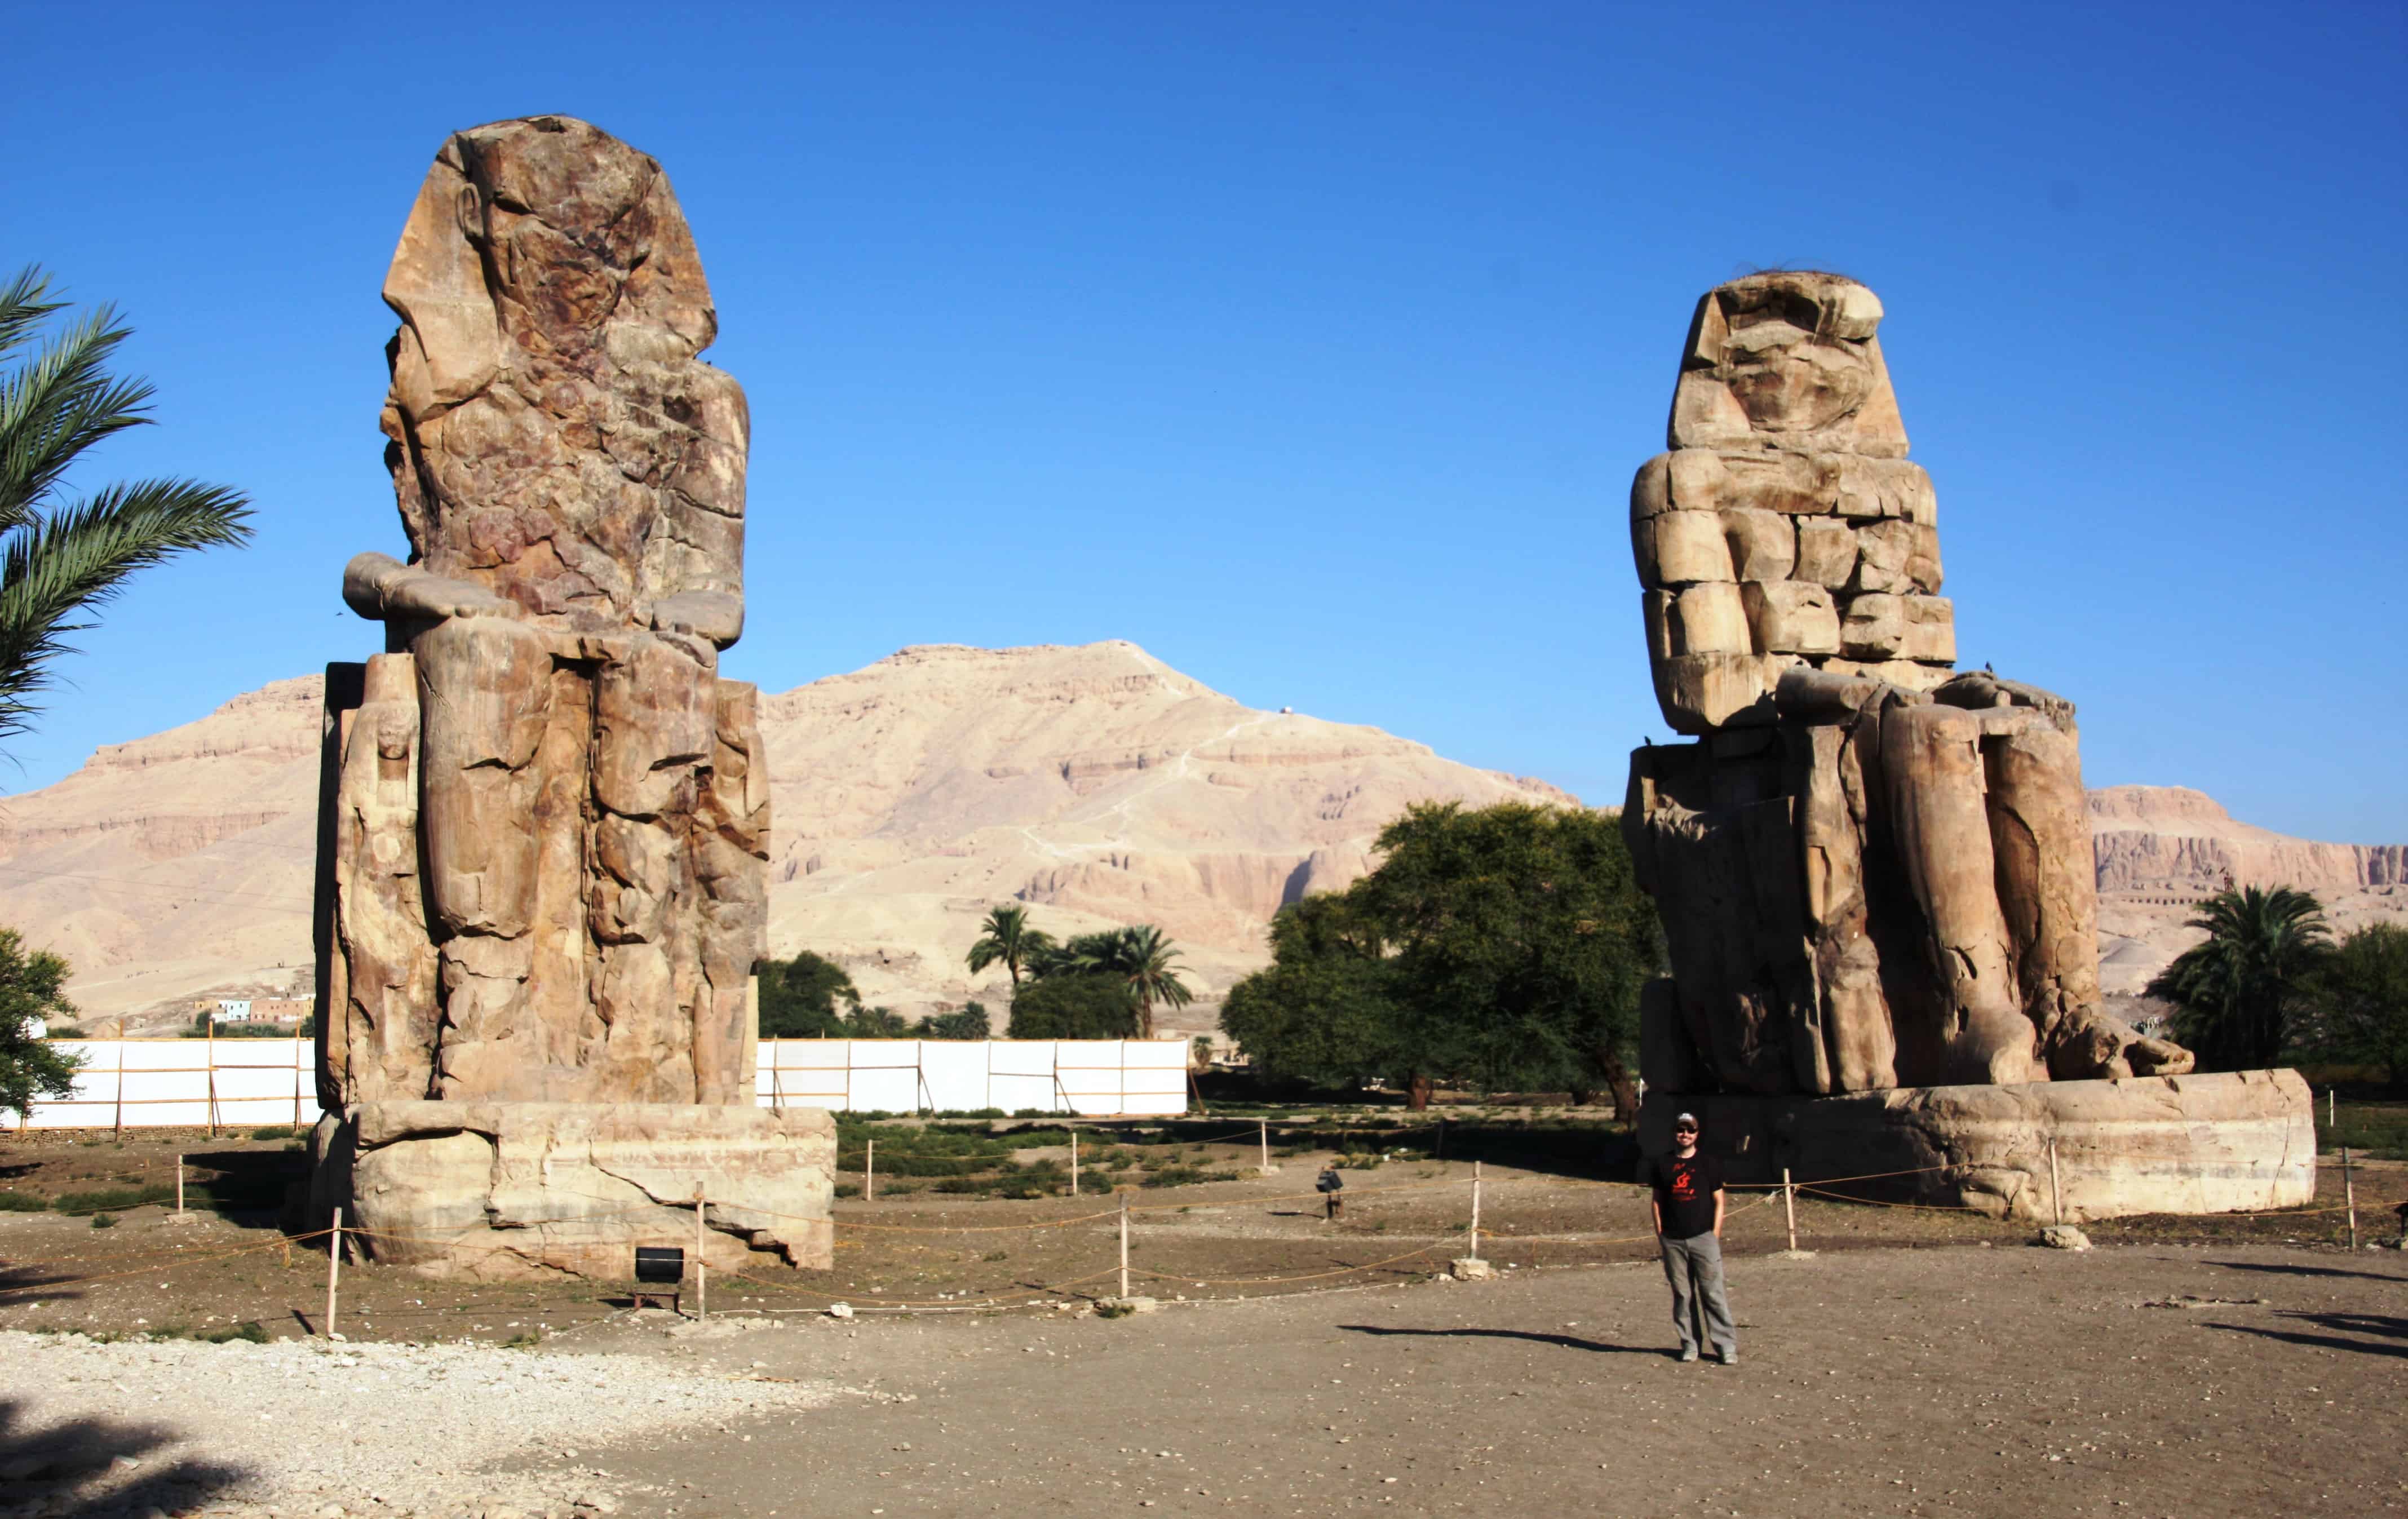 The giant Colossi of Memnon guard what was once the entryway to the vast mortuary temple of Amenhotep III.